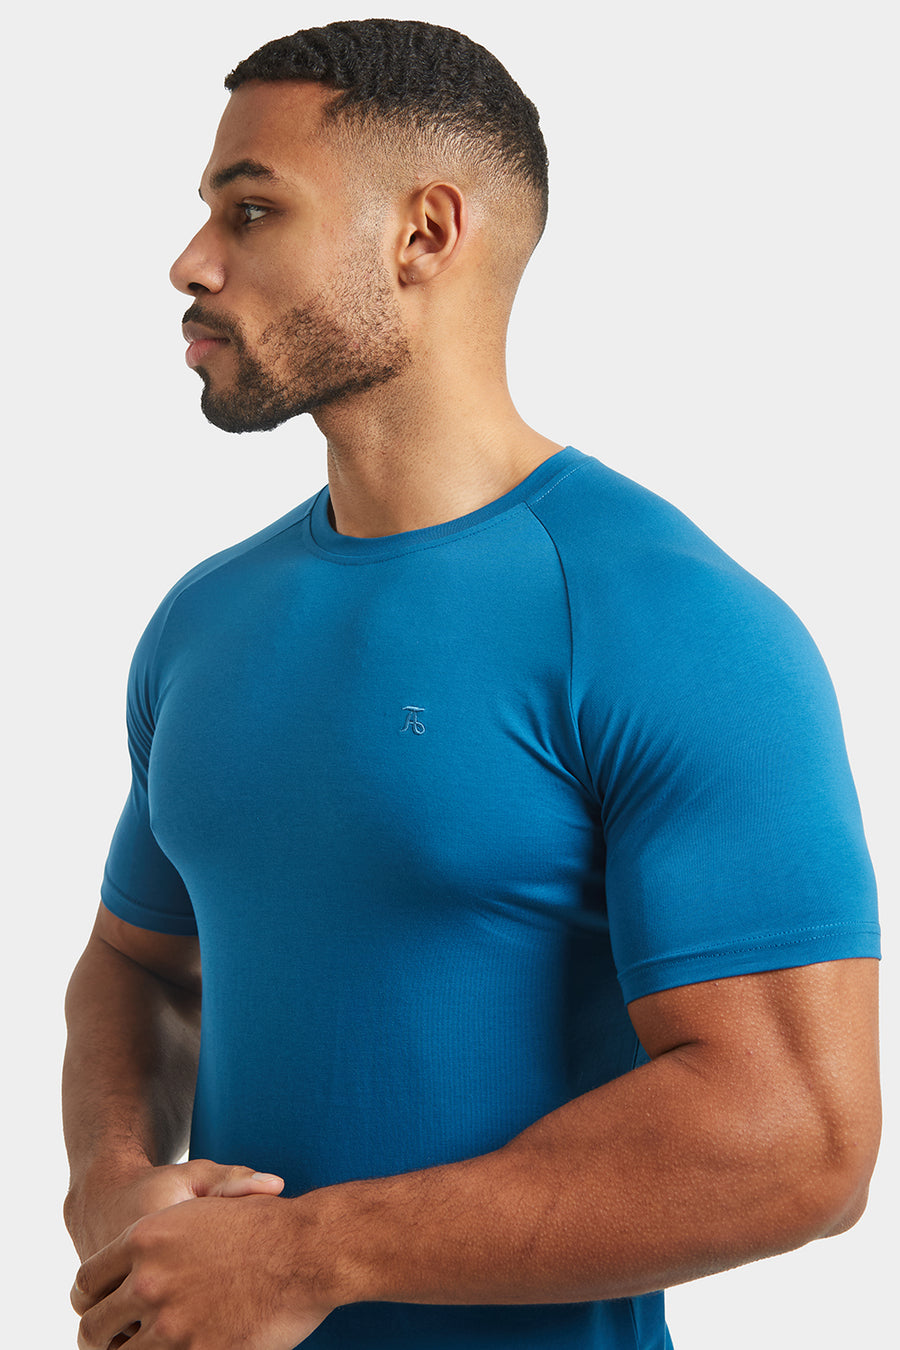 Athletic Fit T-Shirt in Teal - TAILORED ATHLETE - USA